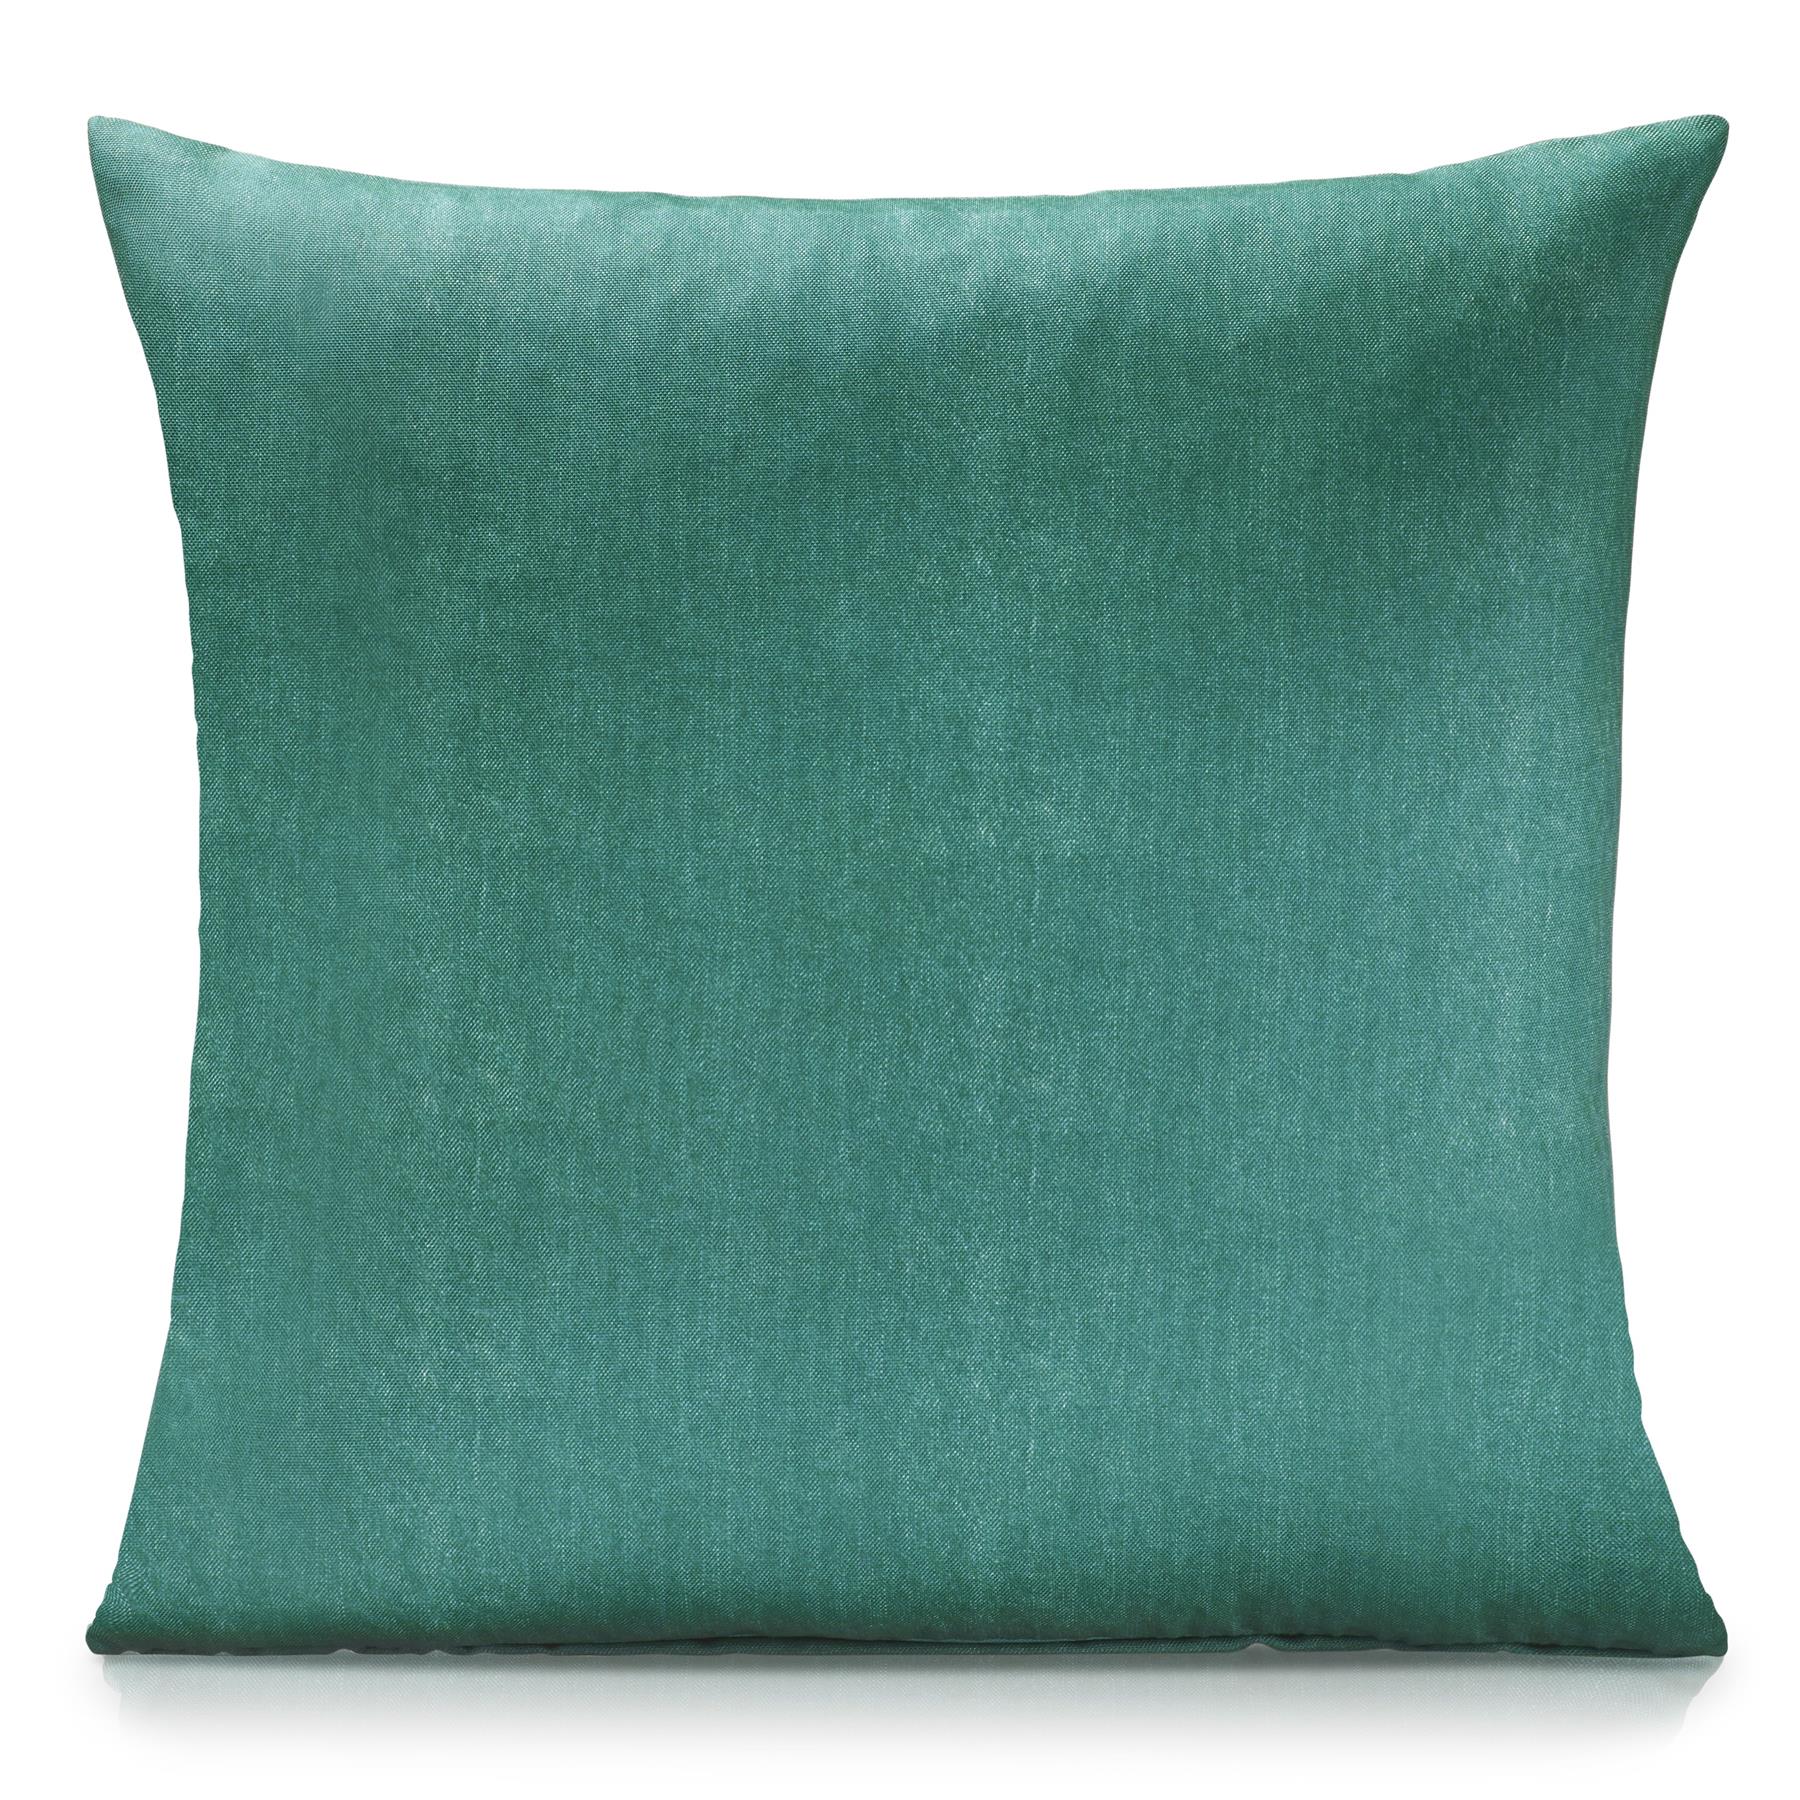 Green Summer Range Water Resistant Outdoor Cushion Covers